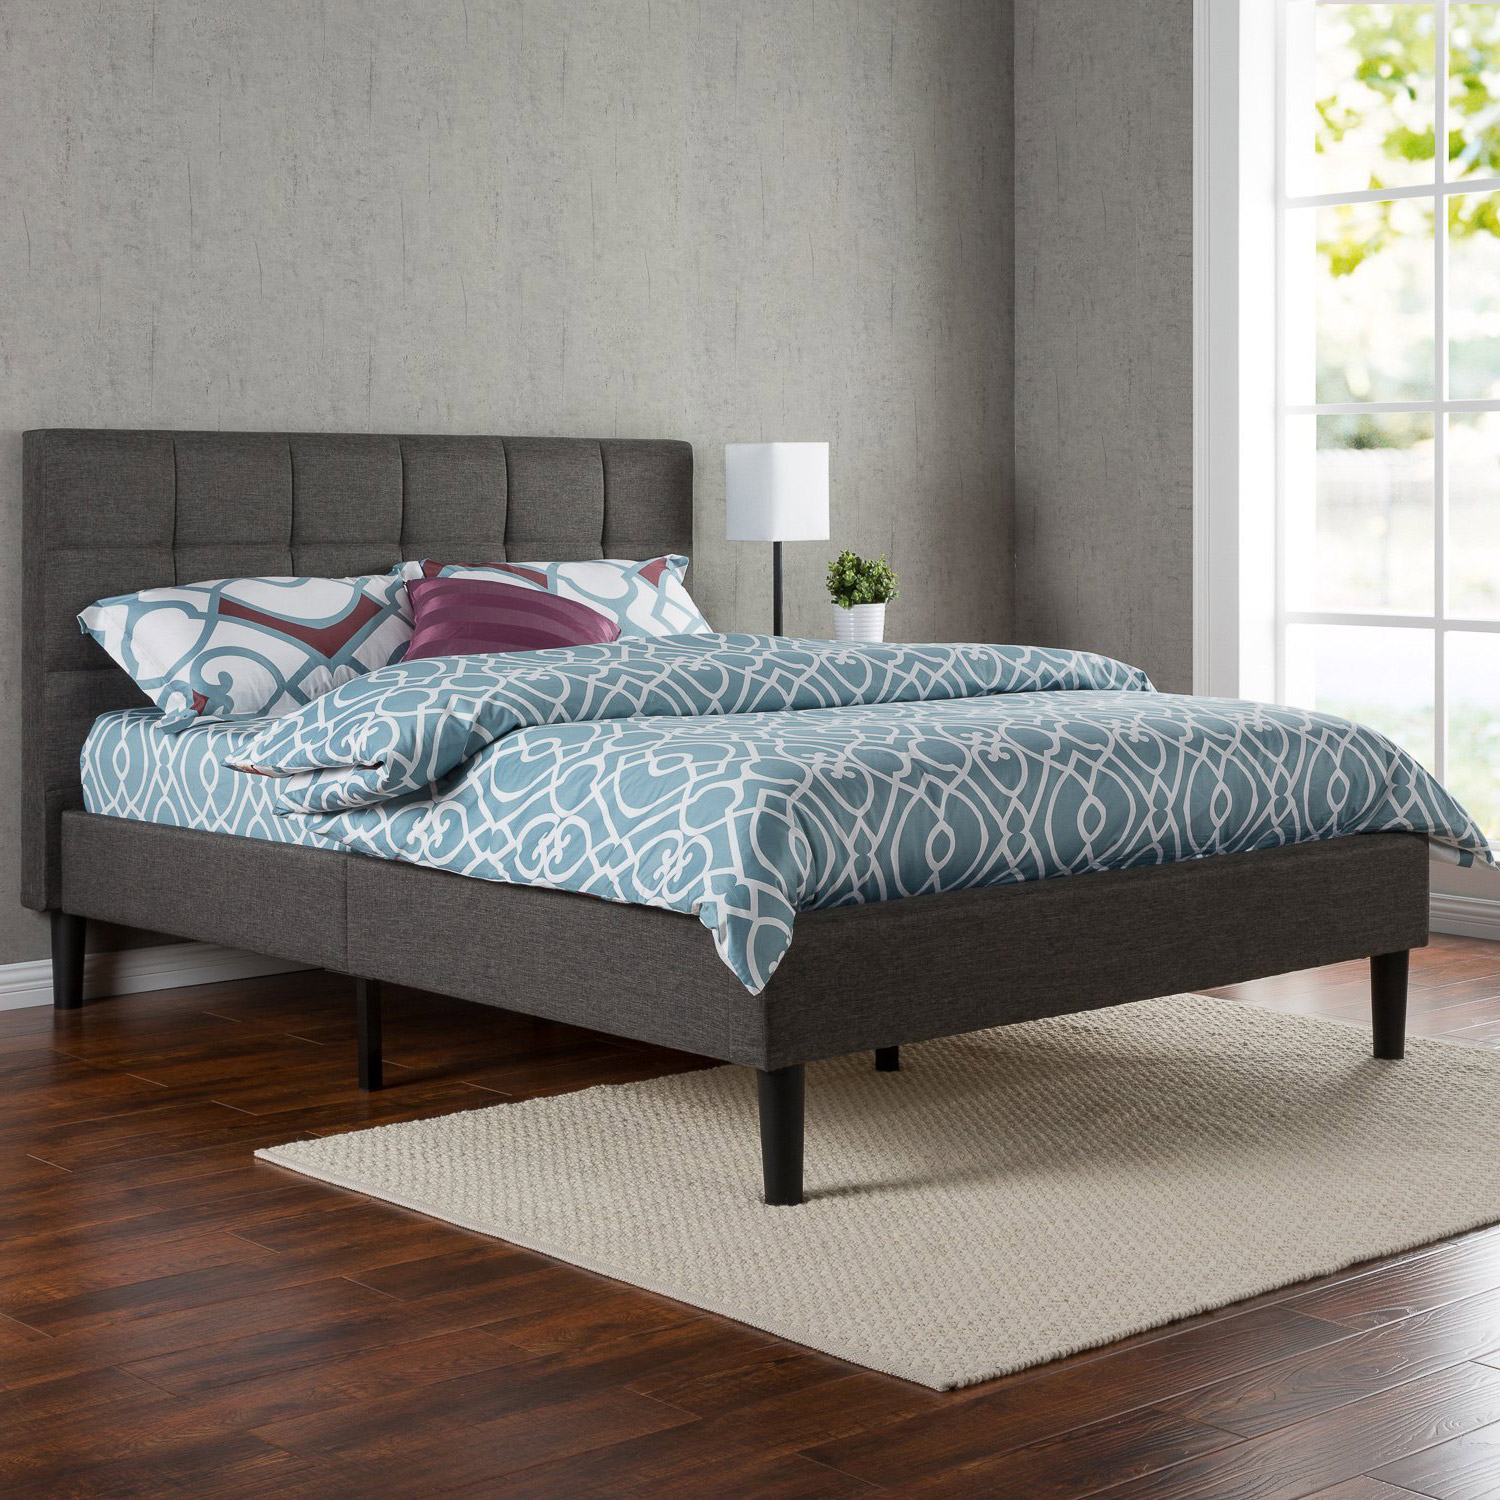 GreenHome123 Grey Upholstered Platform Bed Frame with Wooden Slats and Padded Headboard in Twin Full Queen King